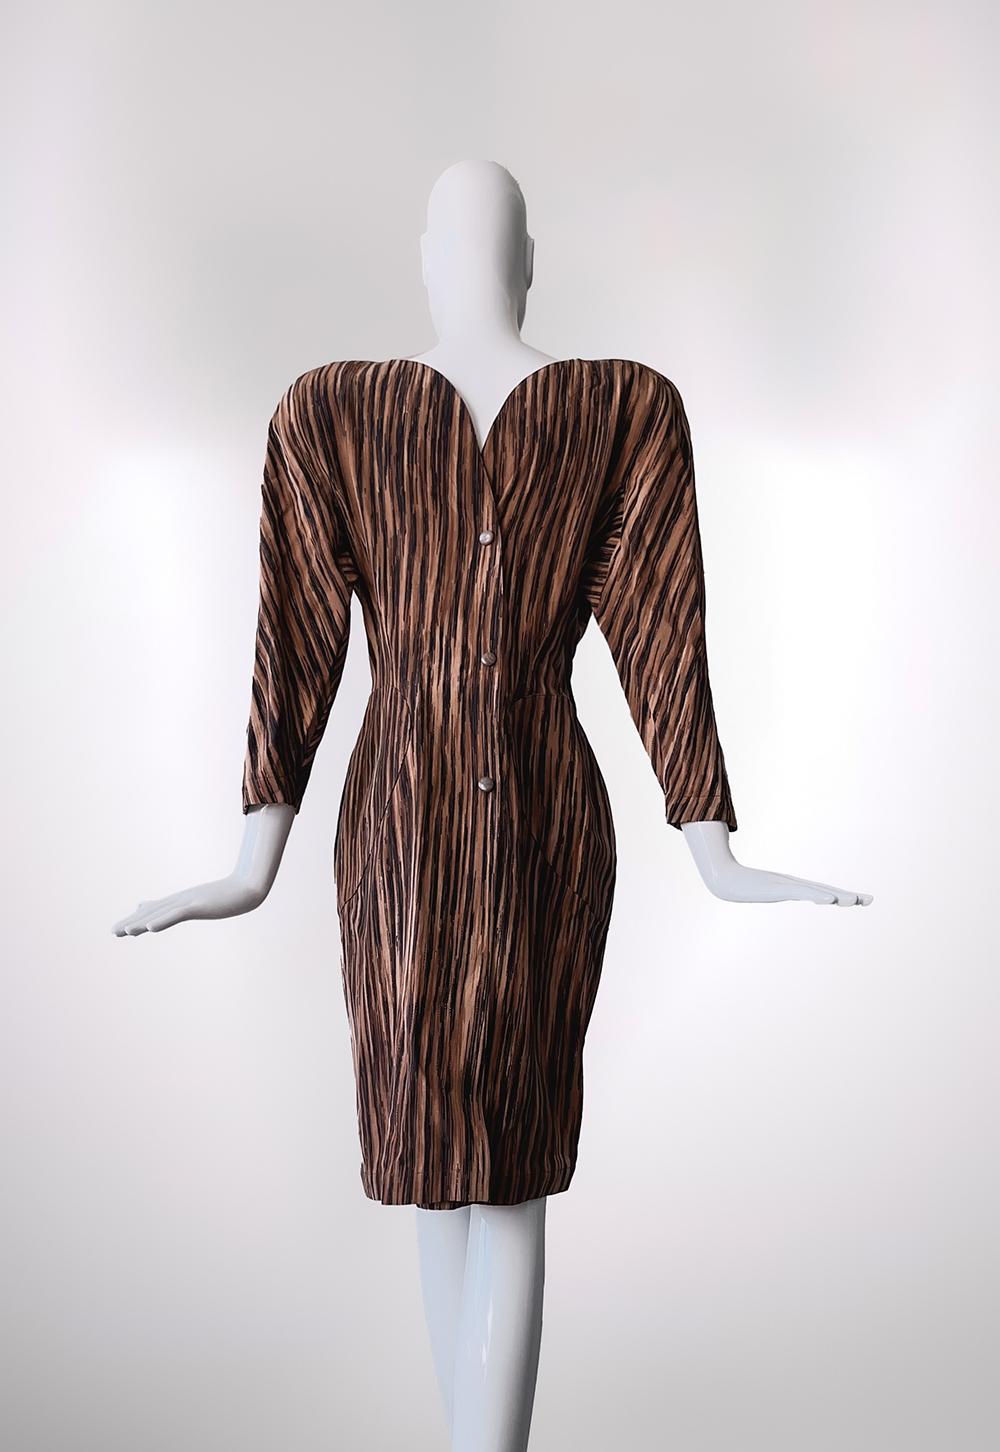 Rare Thierry Mugler SS 1988 Iconic African Collection Sculptural Dress For Sale 2